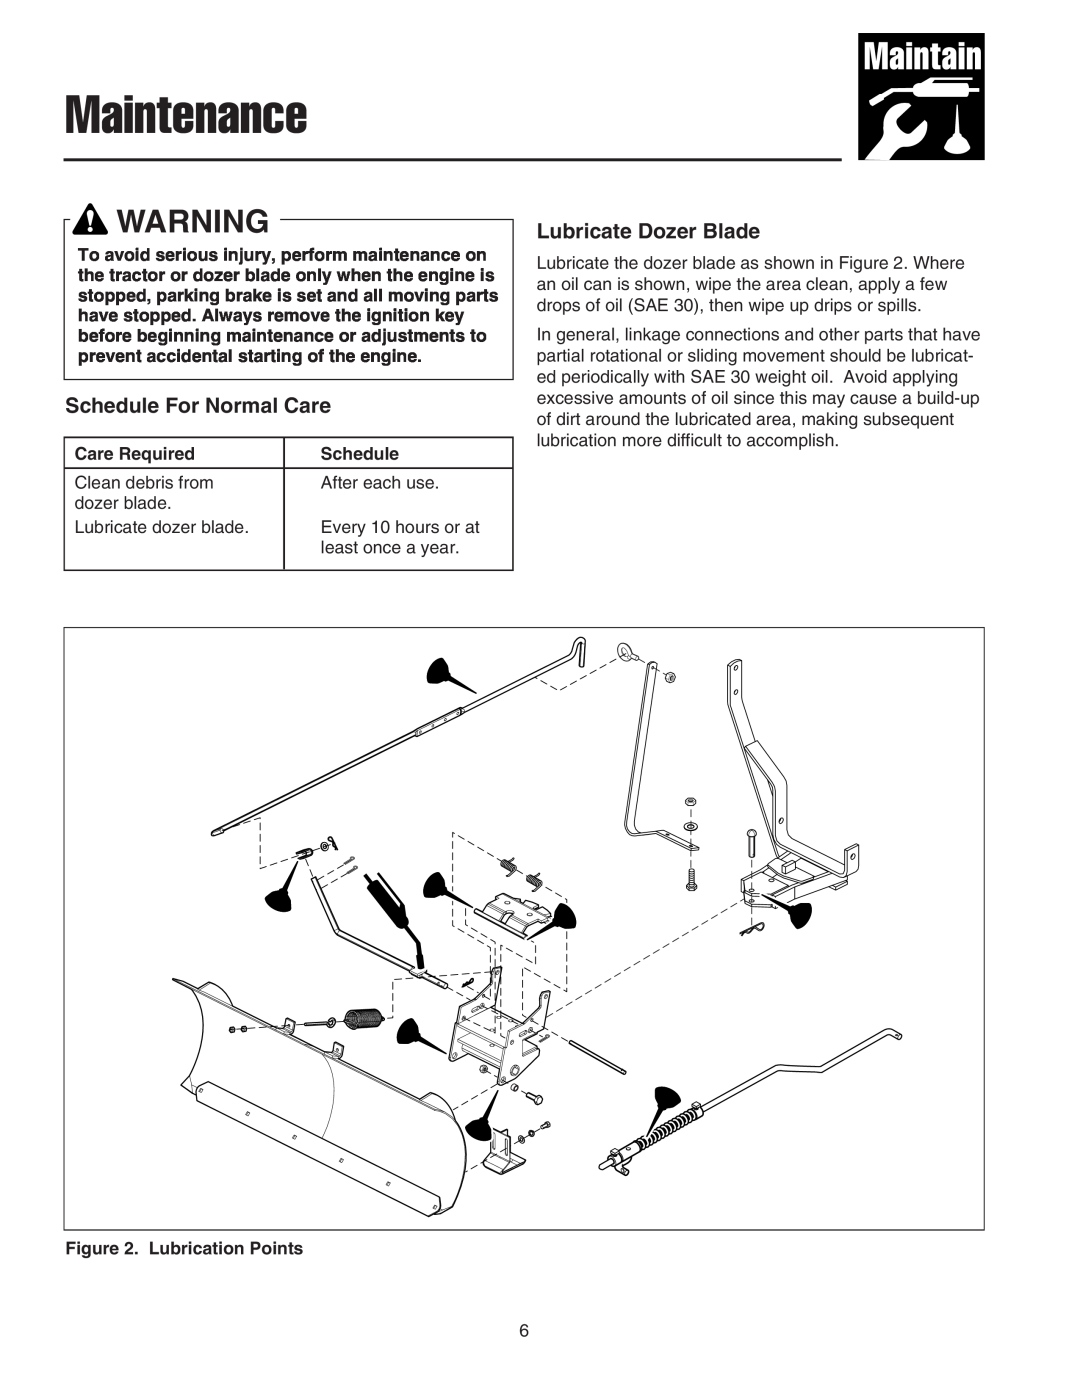 Snapper 1694147, 1723445-02 manual Maintenance, Schedule For Normal Care, Lubricate Dozer Blade 